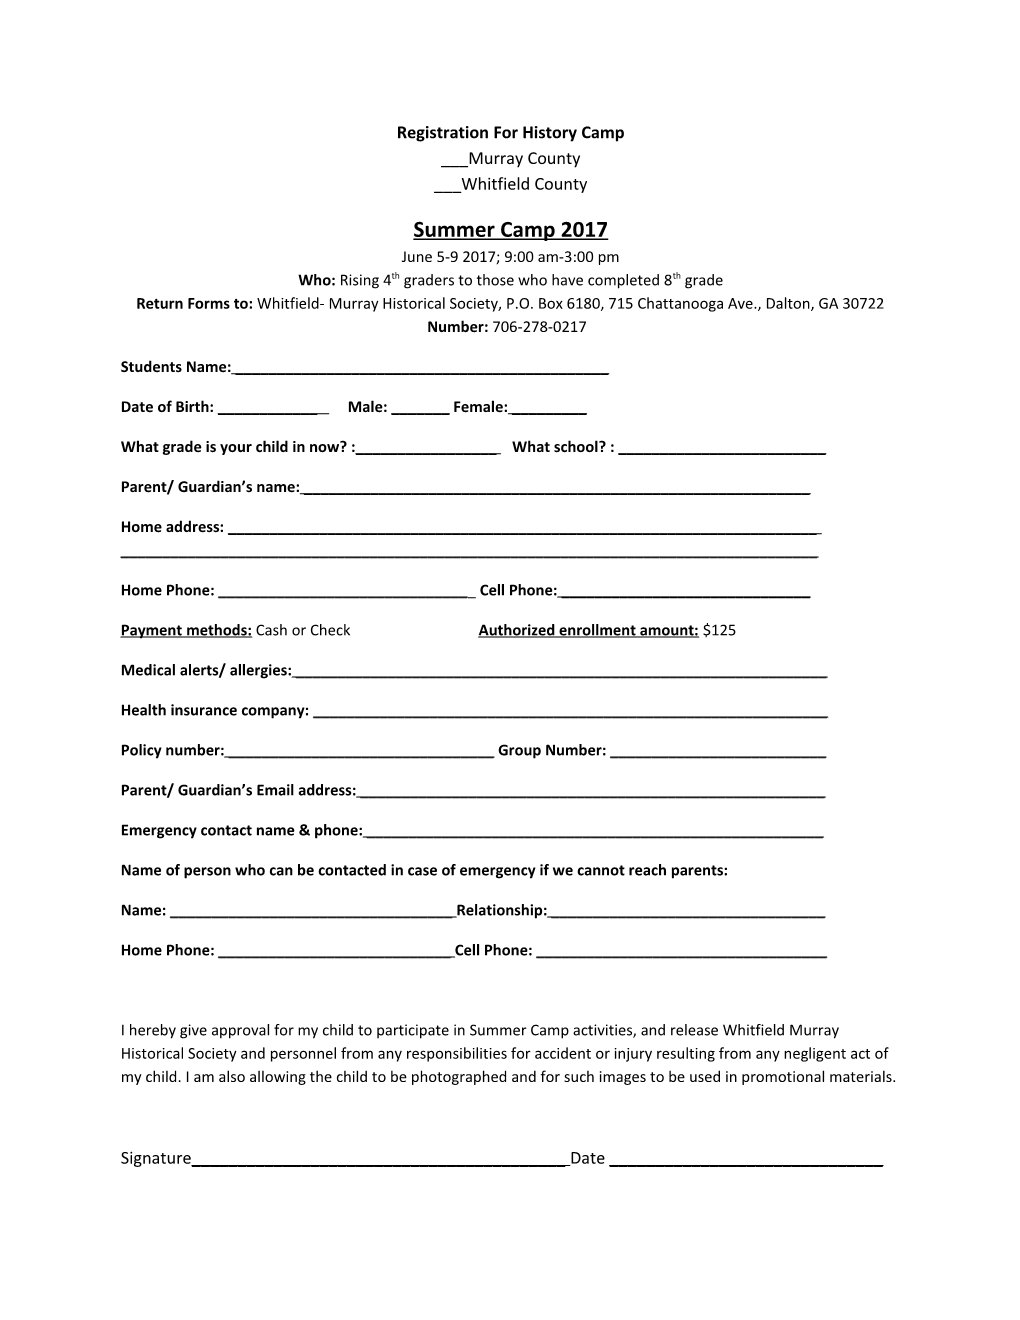 Registration for History Camp ___Murray County ___Whitfield County